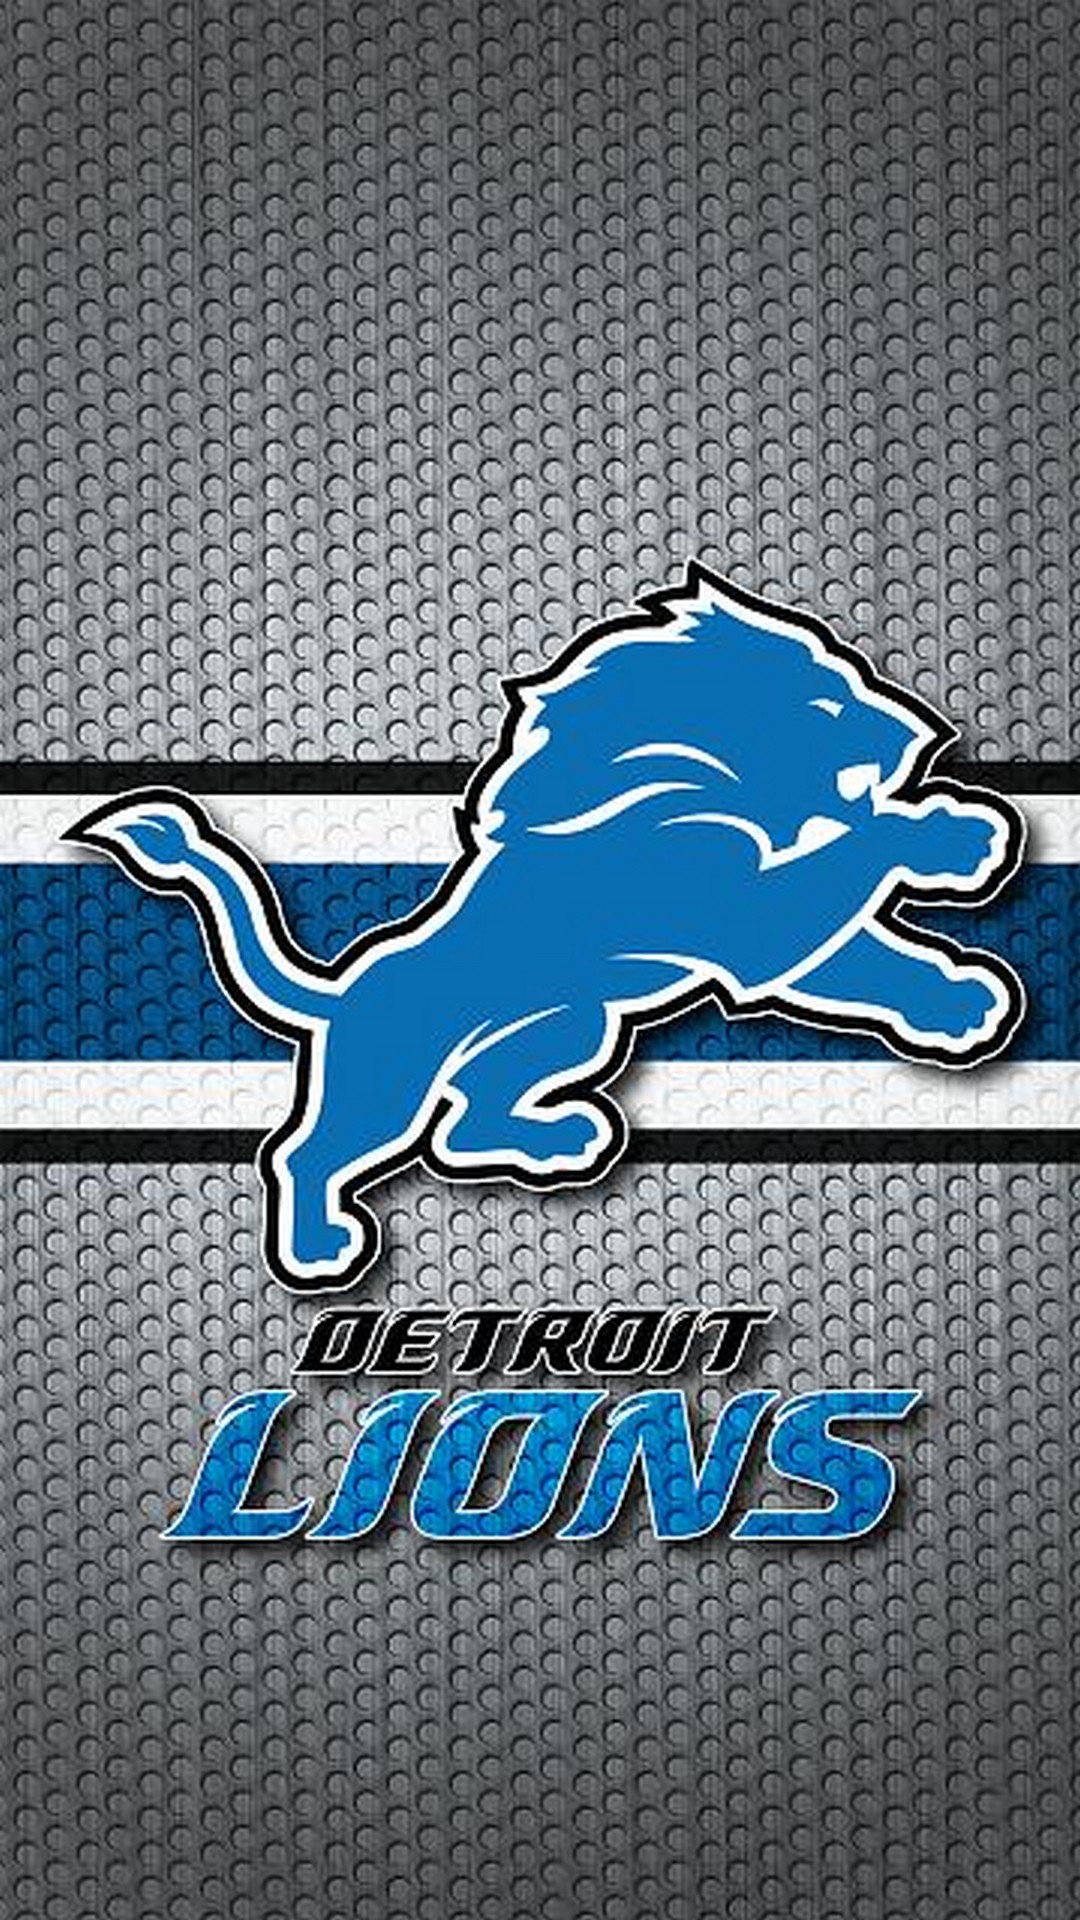 Detroit Lions iPhone Screen Lock Wallpaper with high-resolution 1080x1920 pixel. Download and set as wallpaper for Apple iPhone X, XS Max, XR, 8, 7, 6, SE, iPad, Android